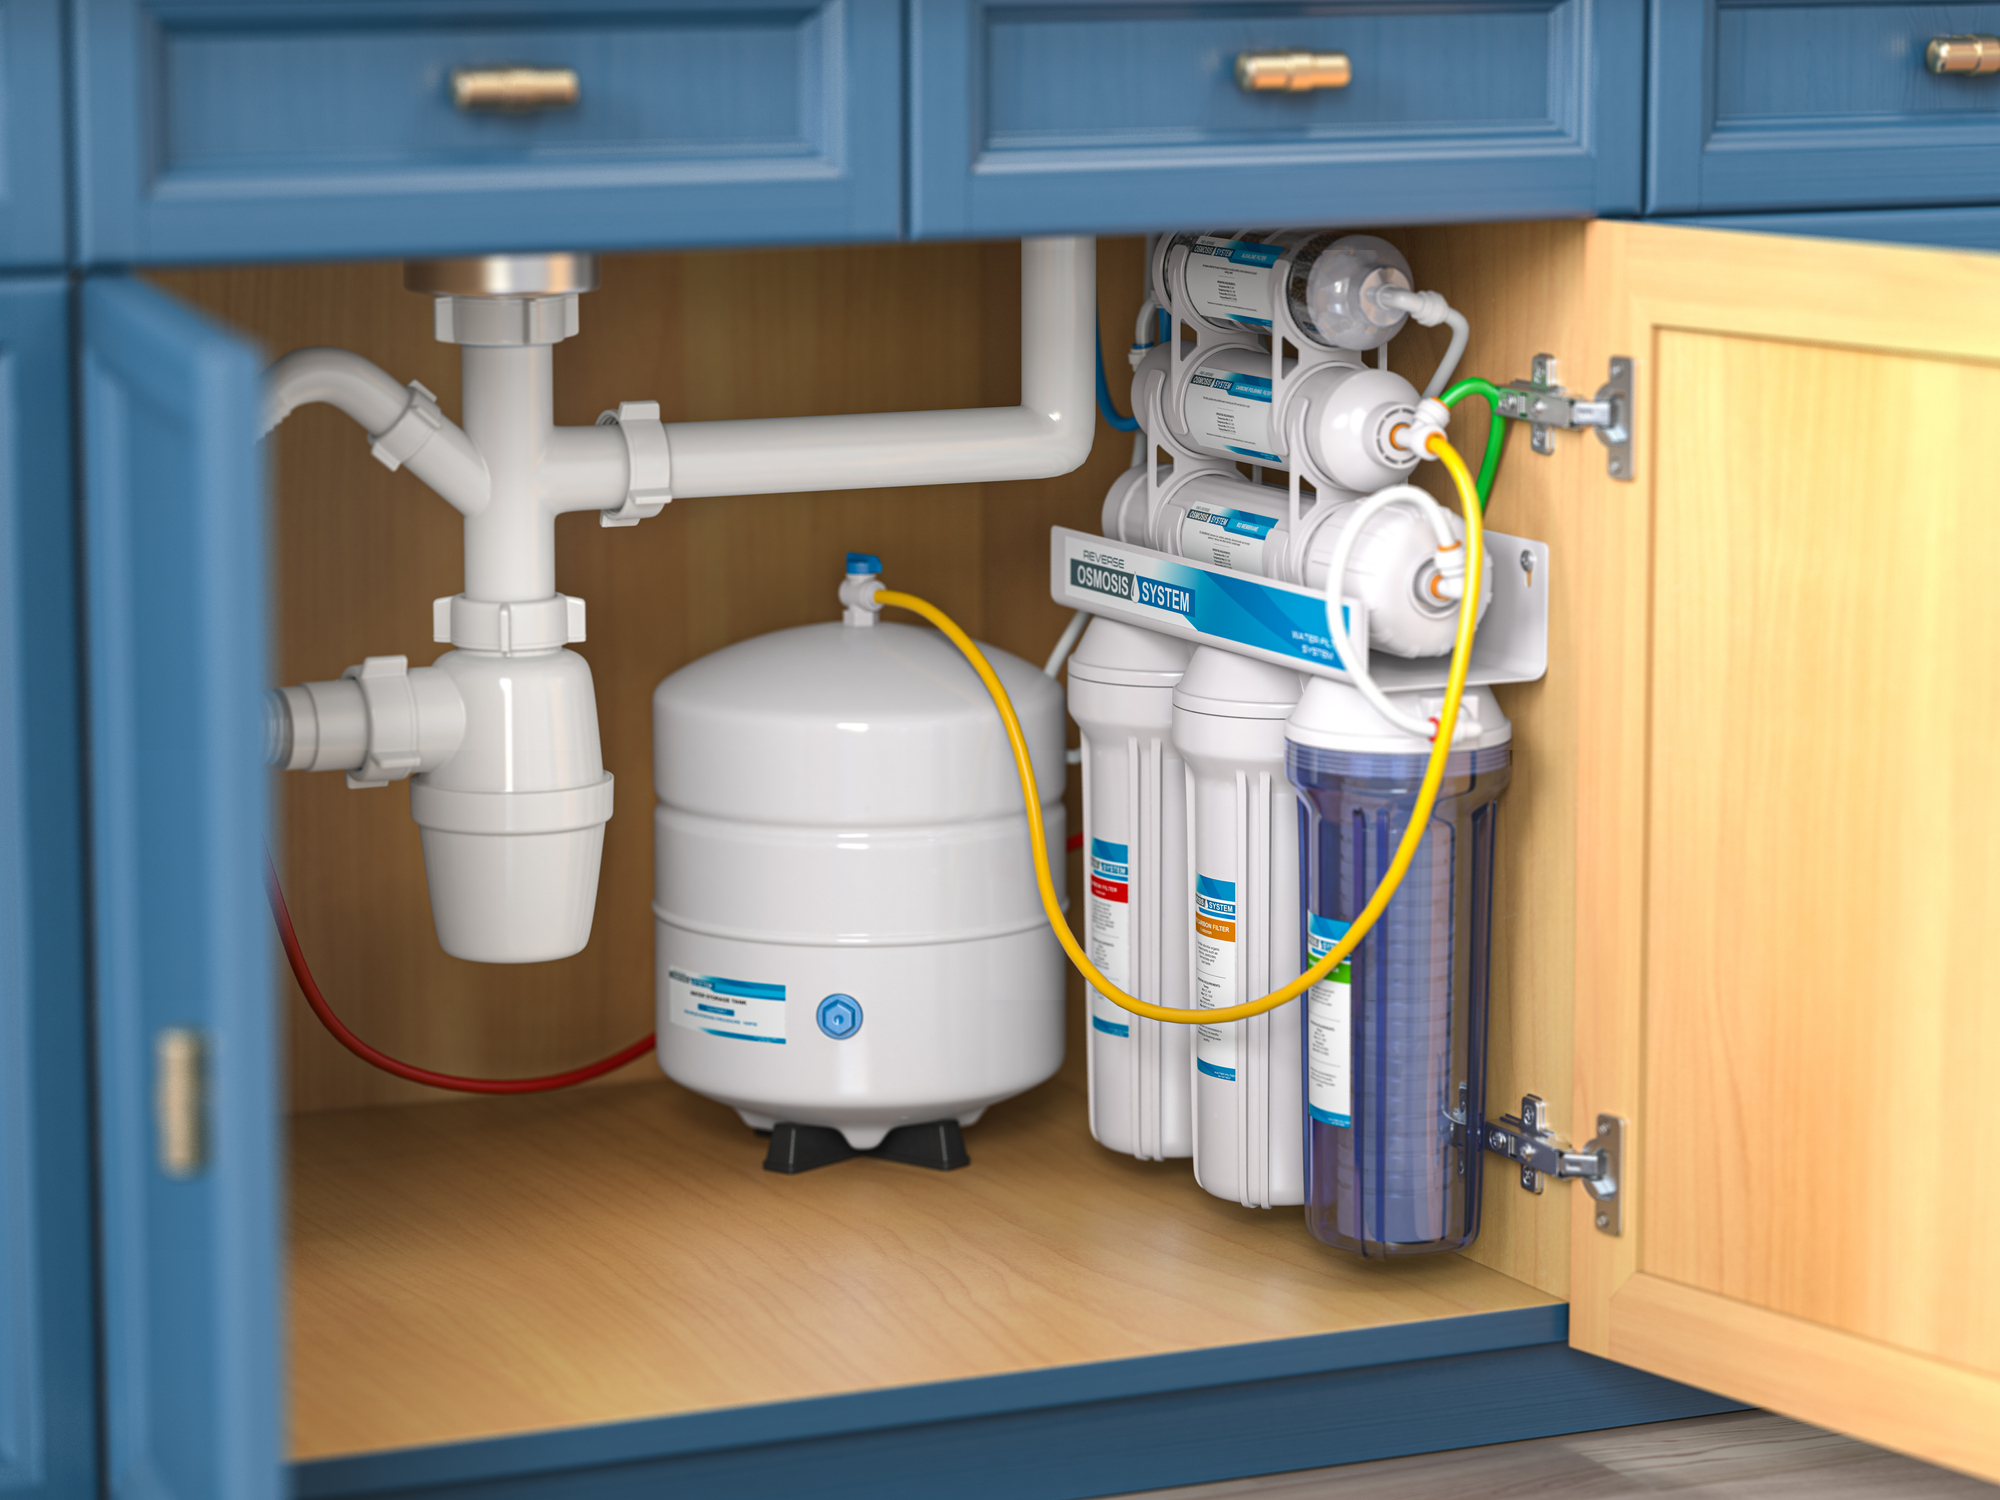 How do I install a water softener?